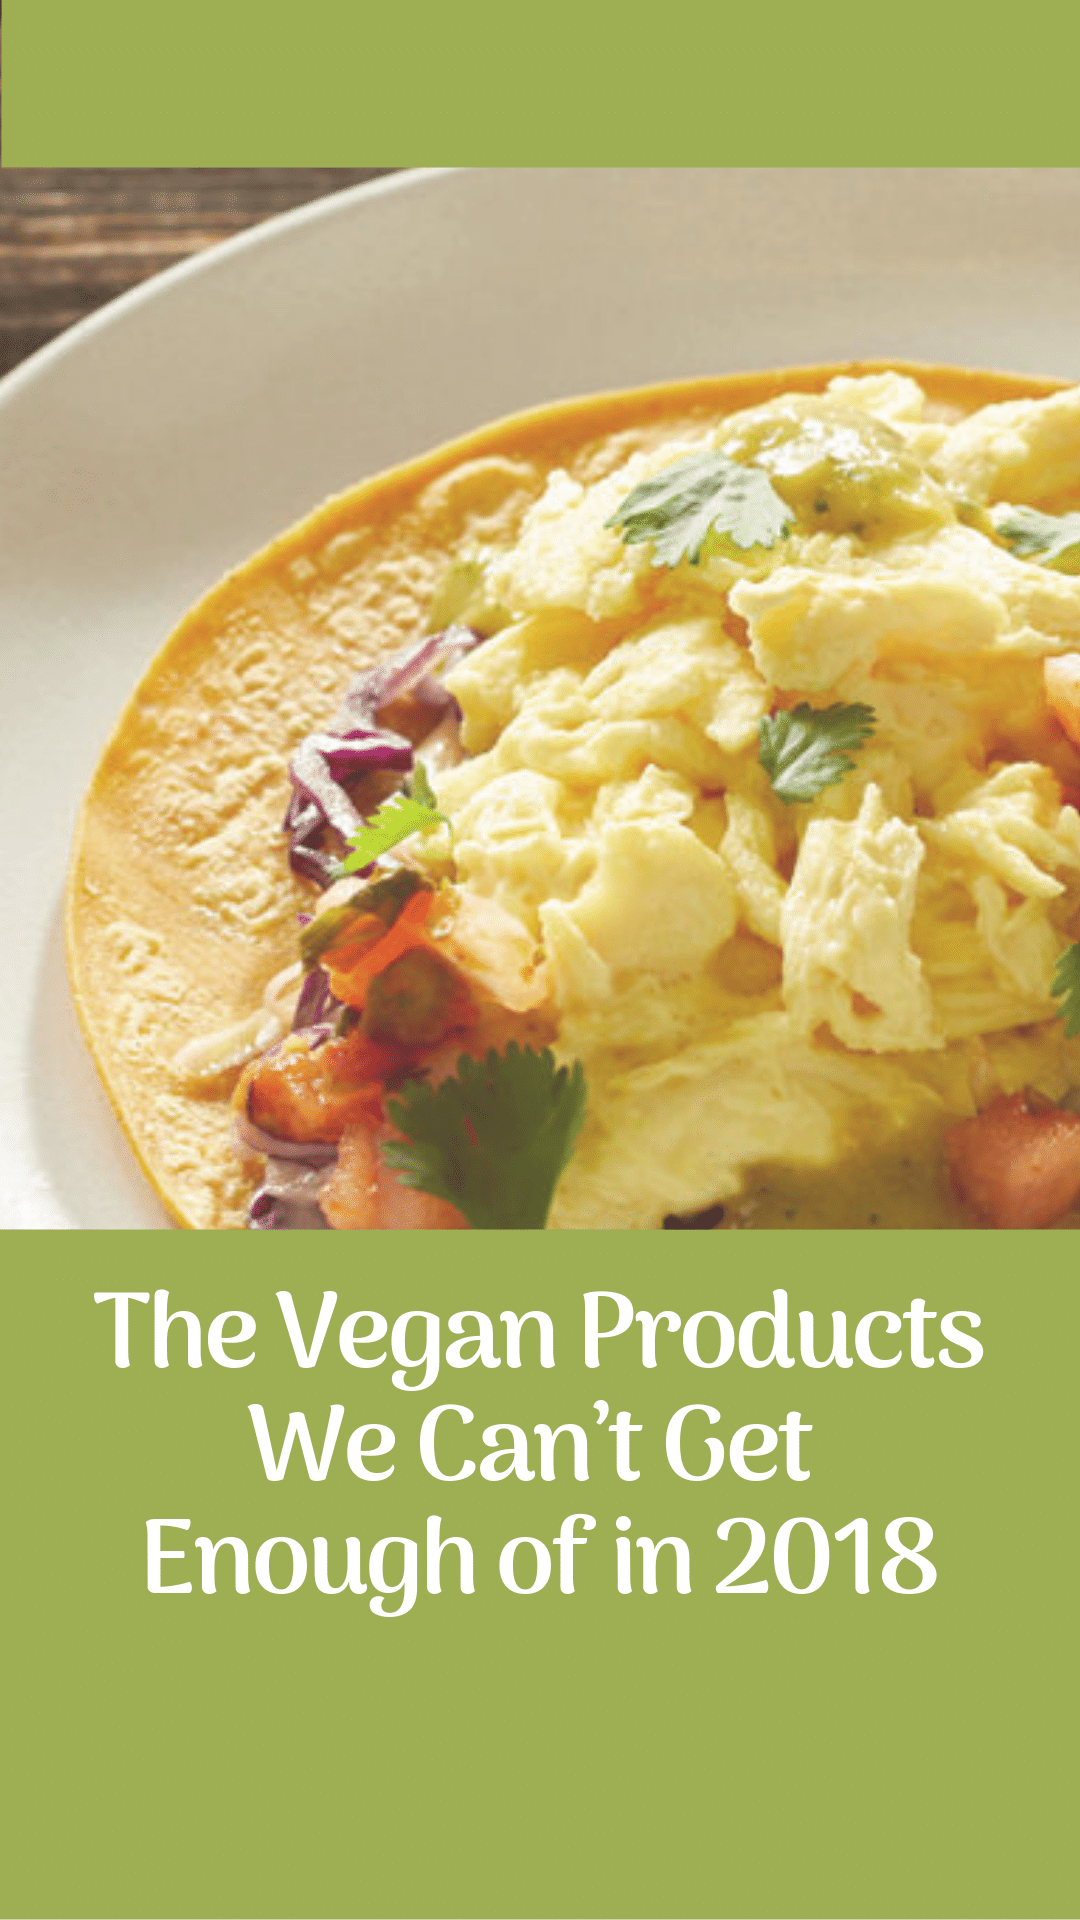 The Vegan Products We Can’t Get Enough of in 2018